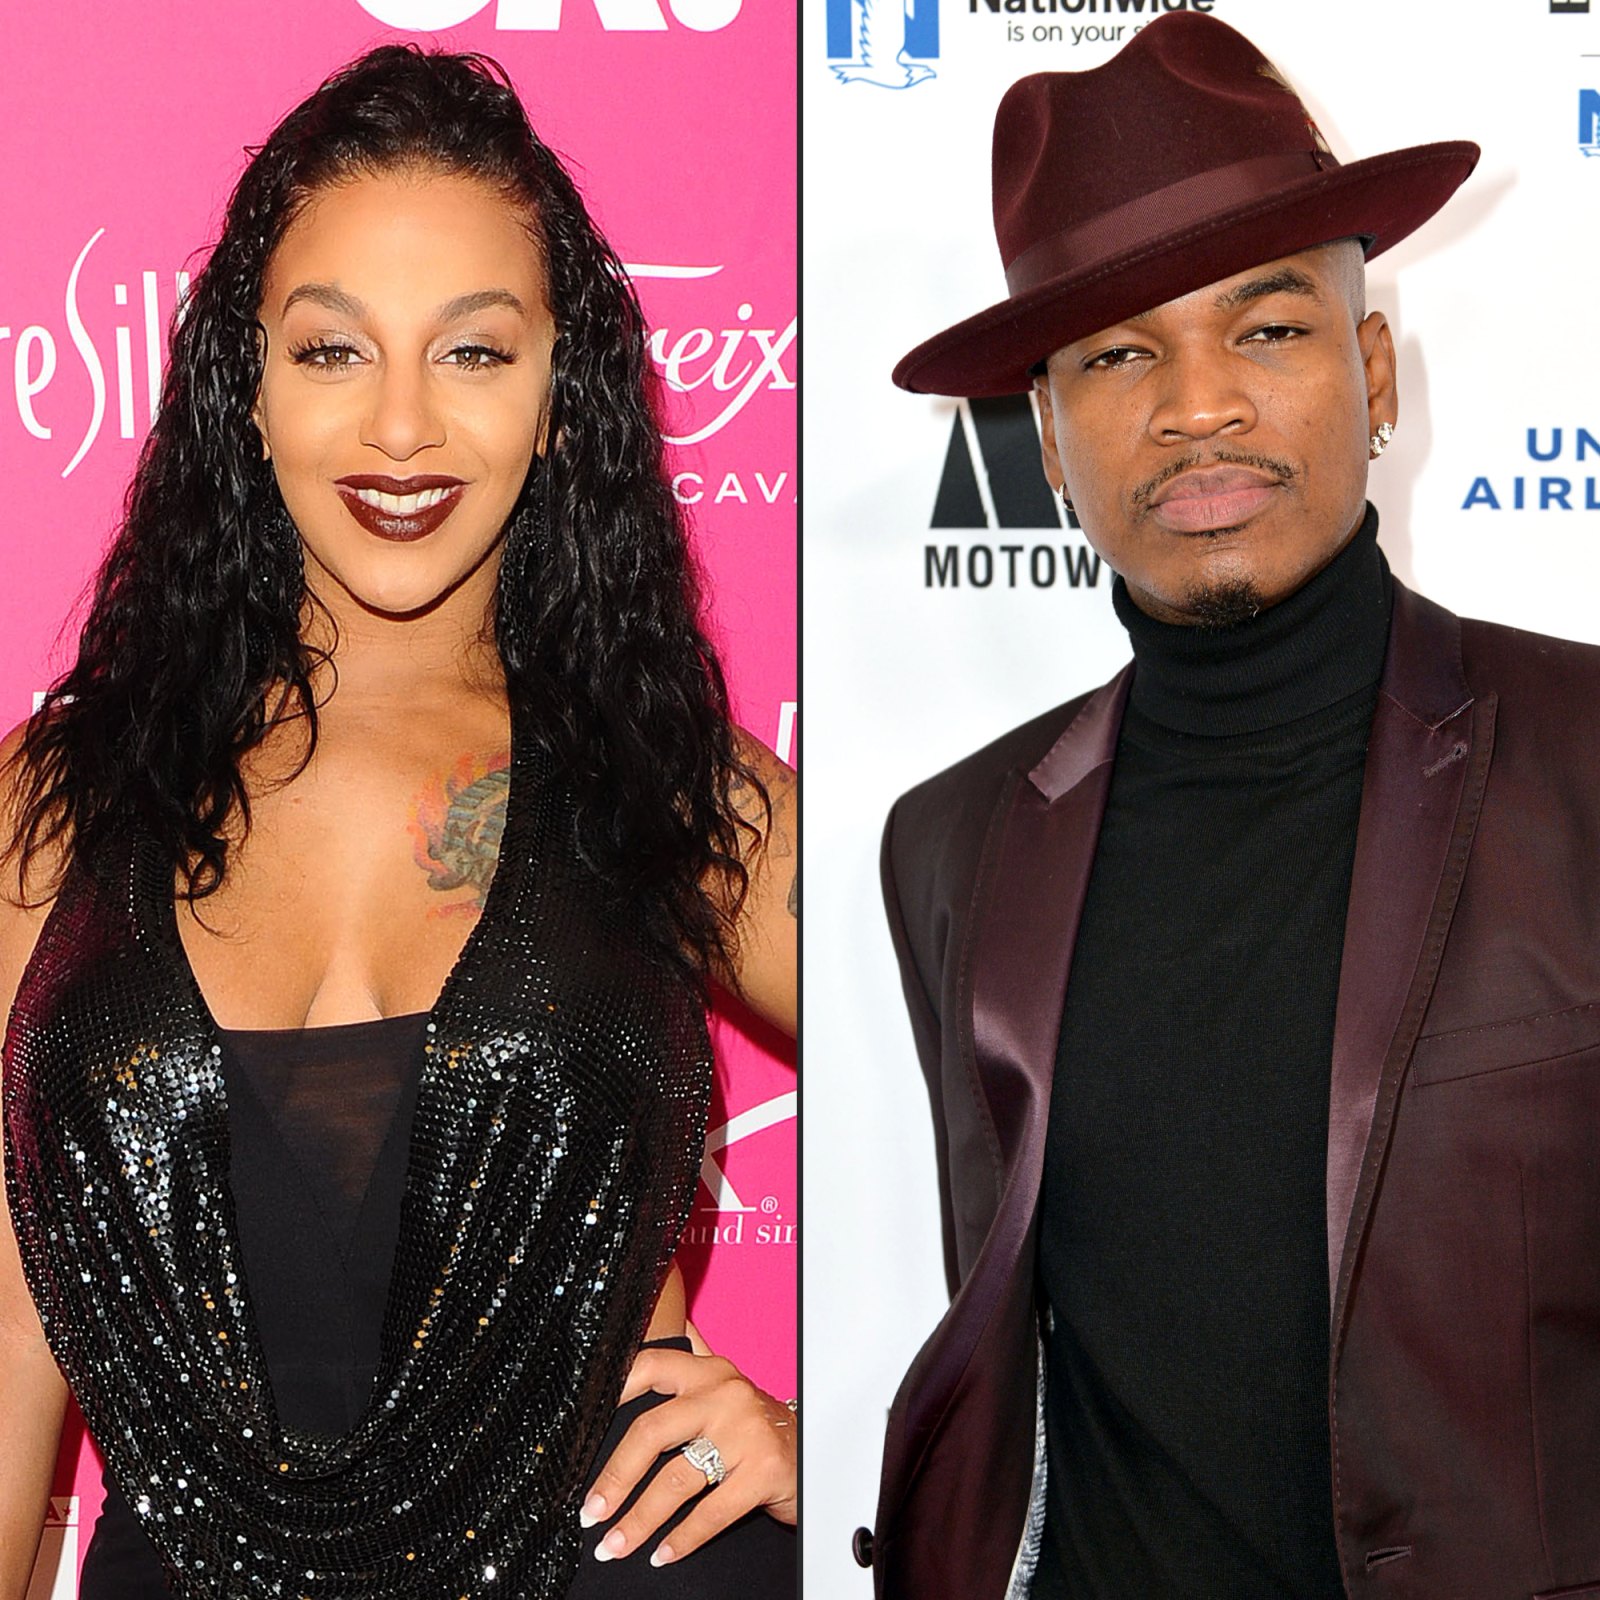 Crystal Renay Says She Won't Reconcile With Ne-Yo After Cheating Allegations